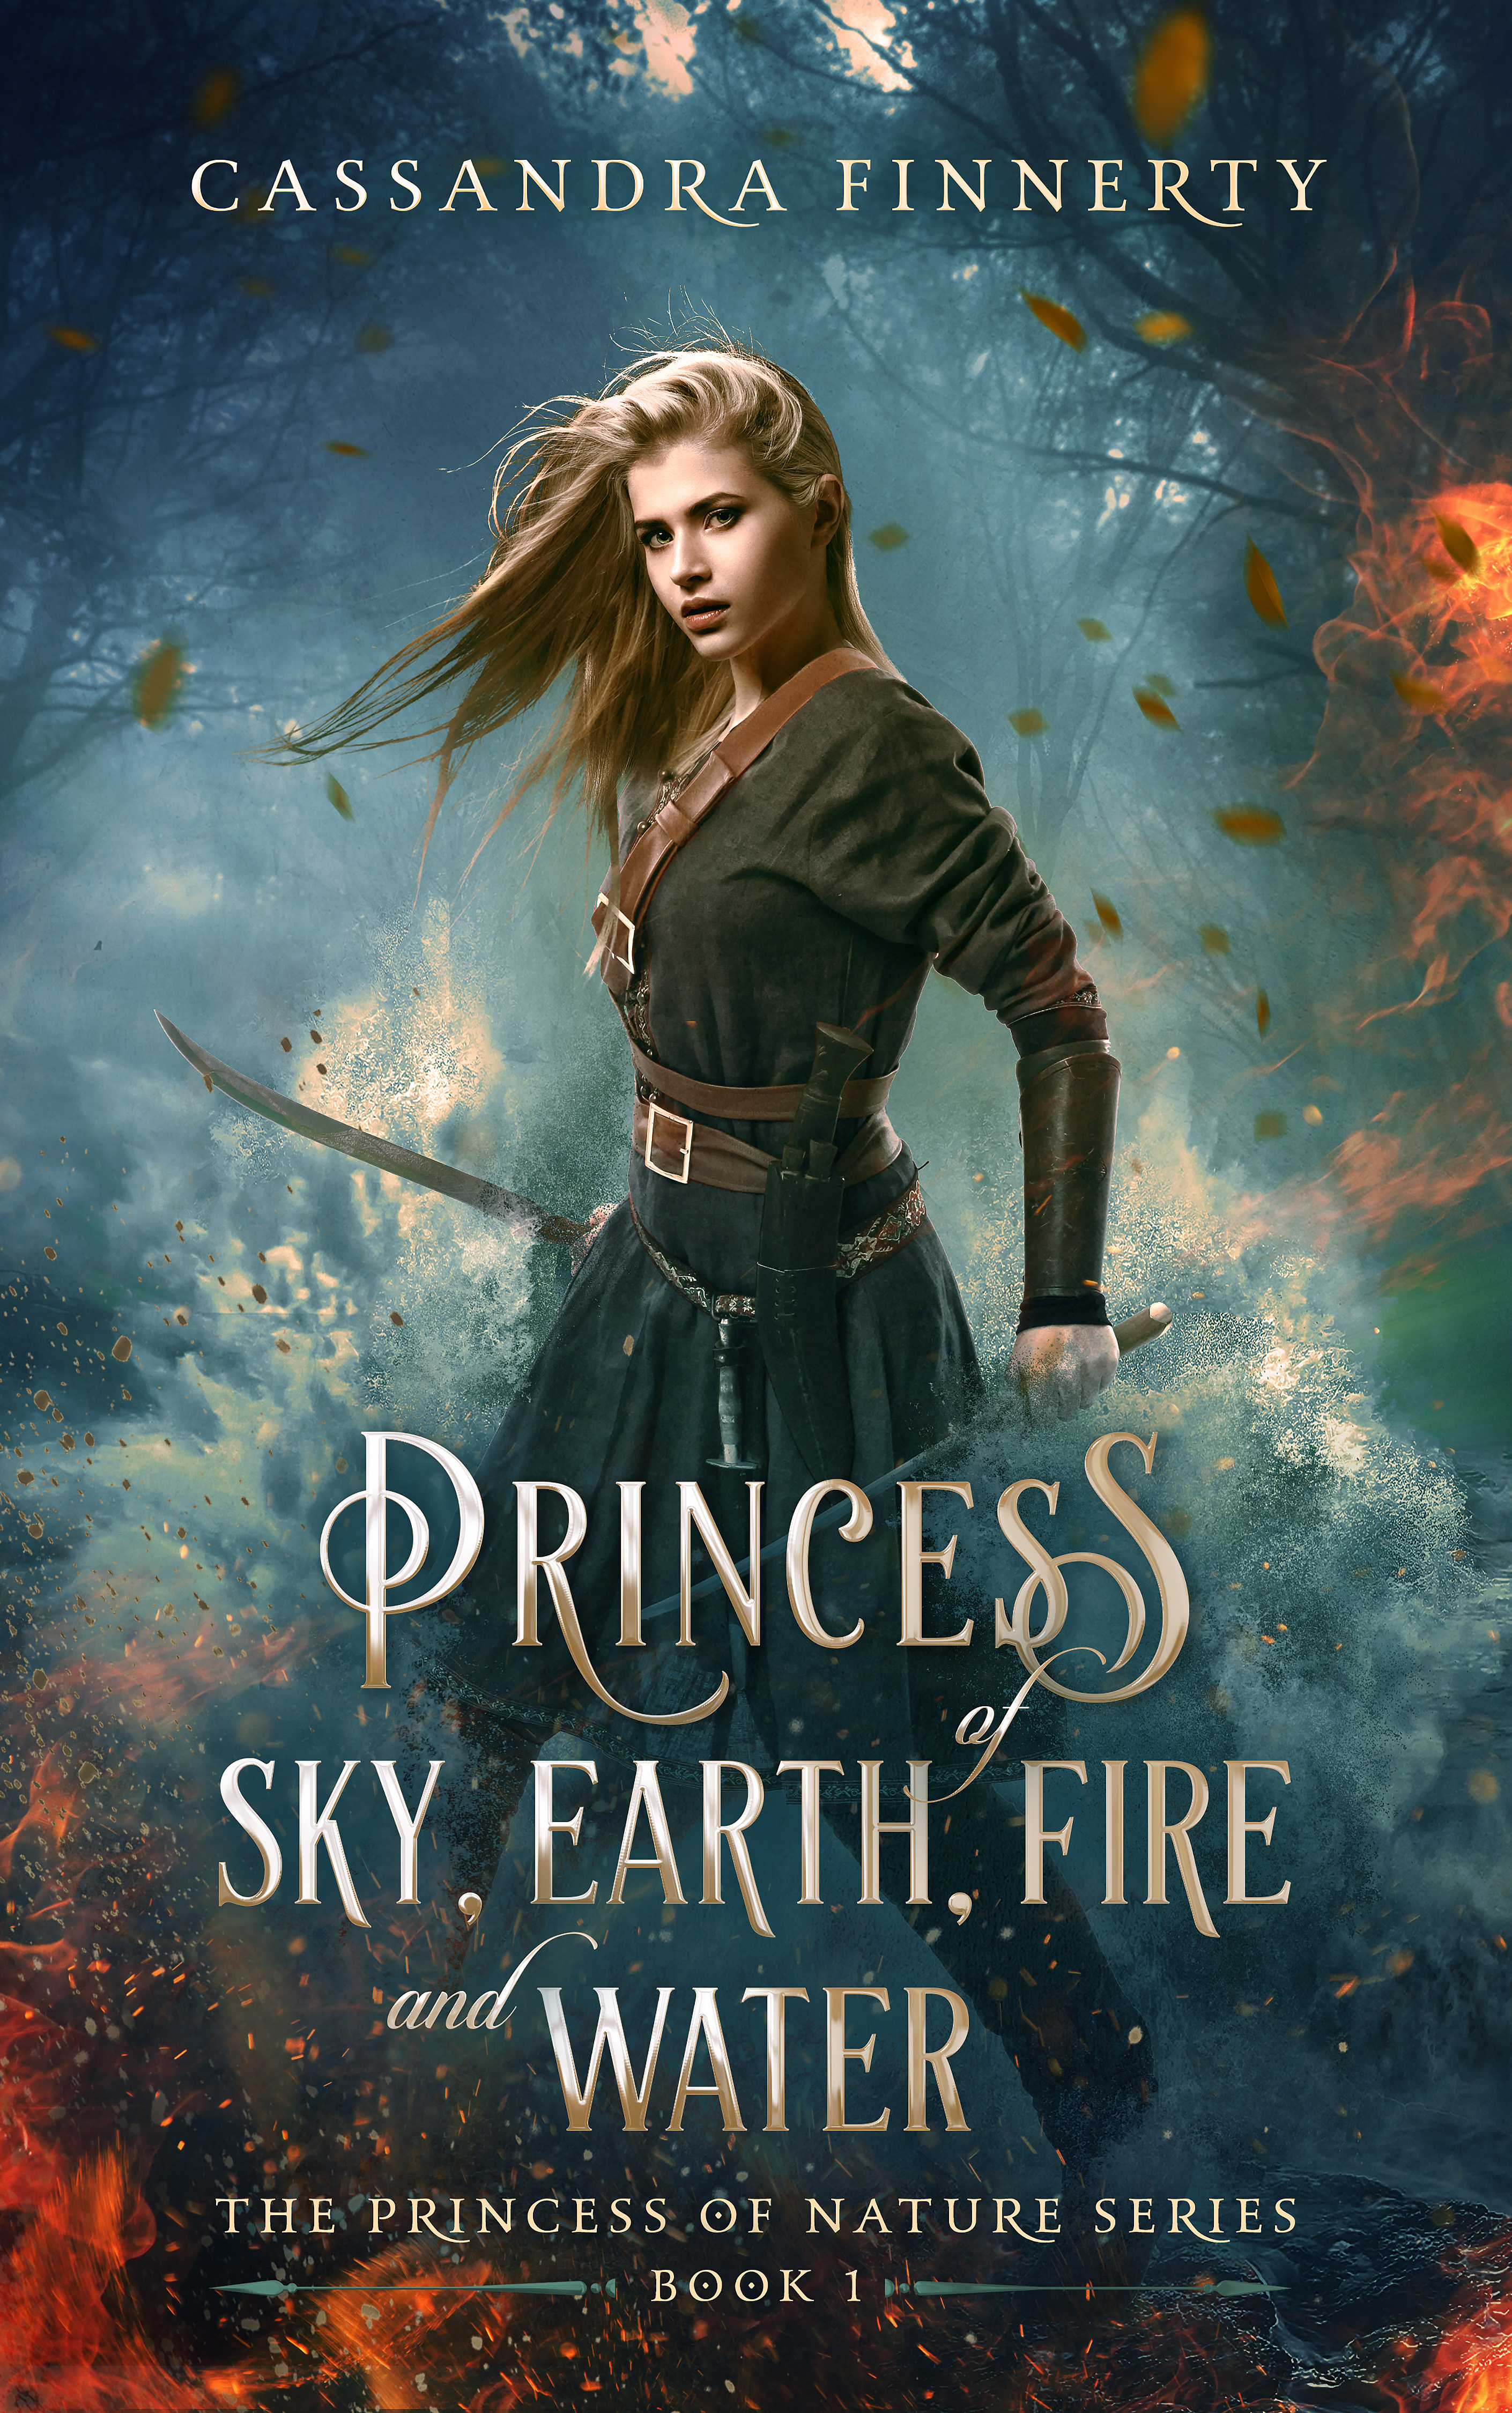 Princess of Sky, Earth, Fire and Water by Cassandra Finnerty